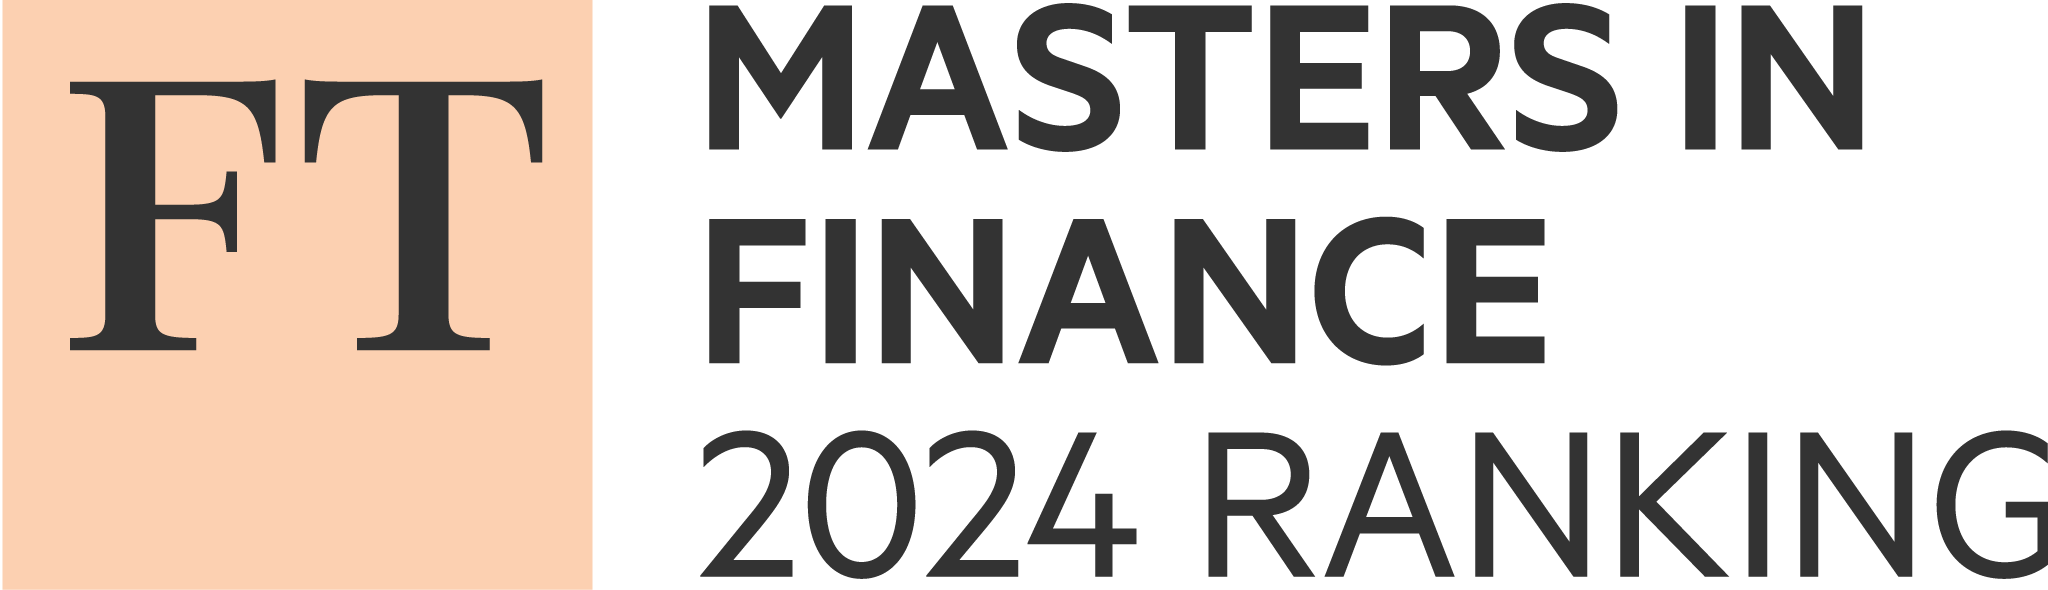 FT_RANKINGS_2024_RGB__MASTERS_IN_FINANCE_RGB.png